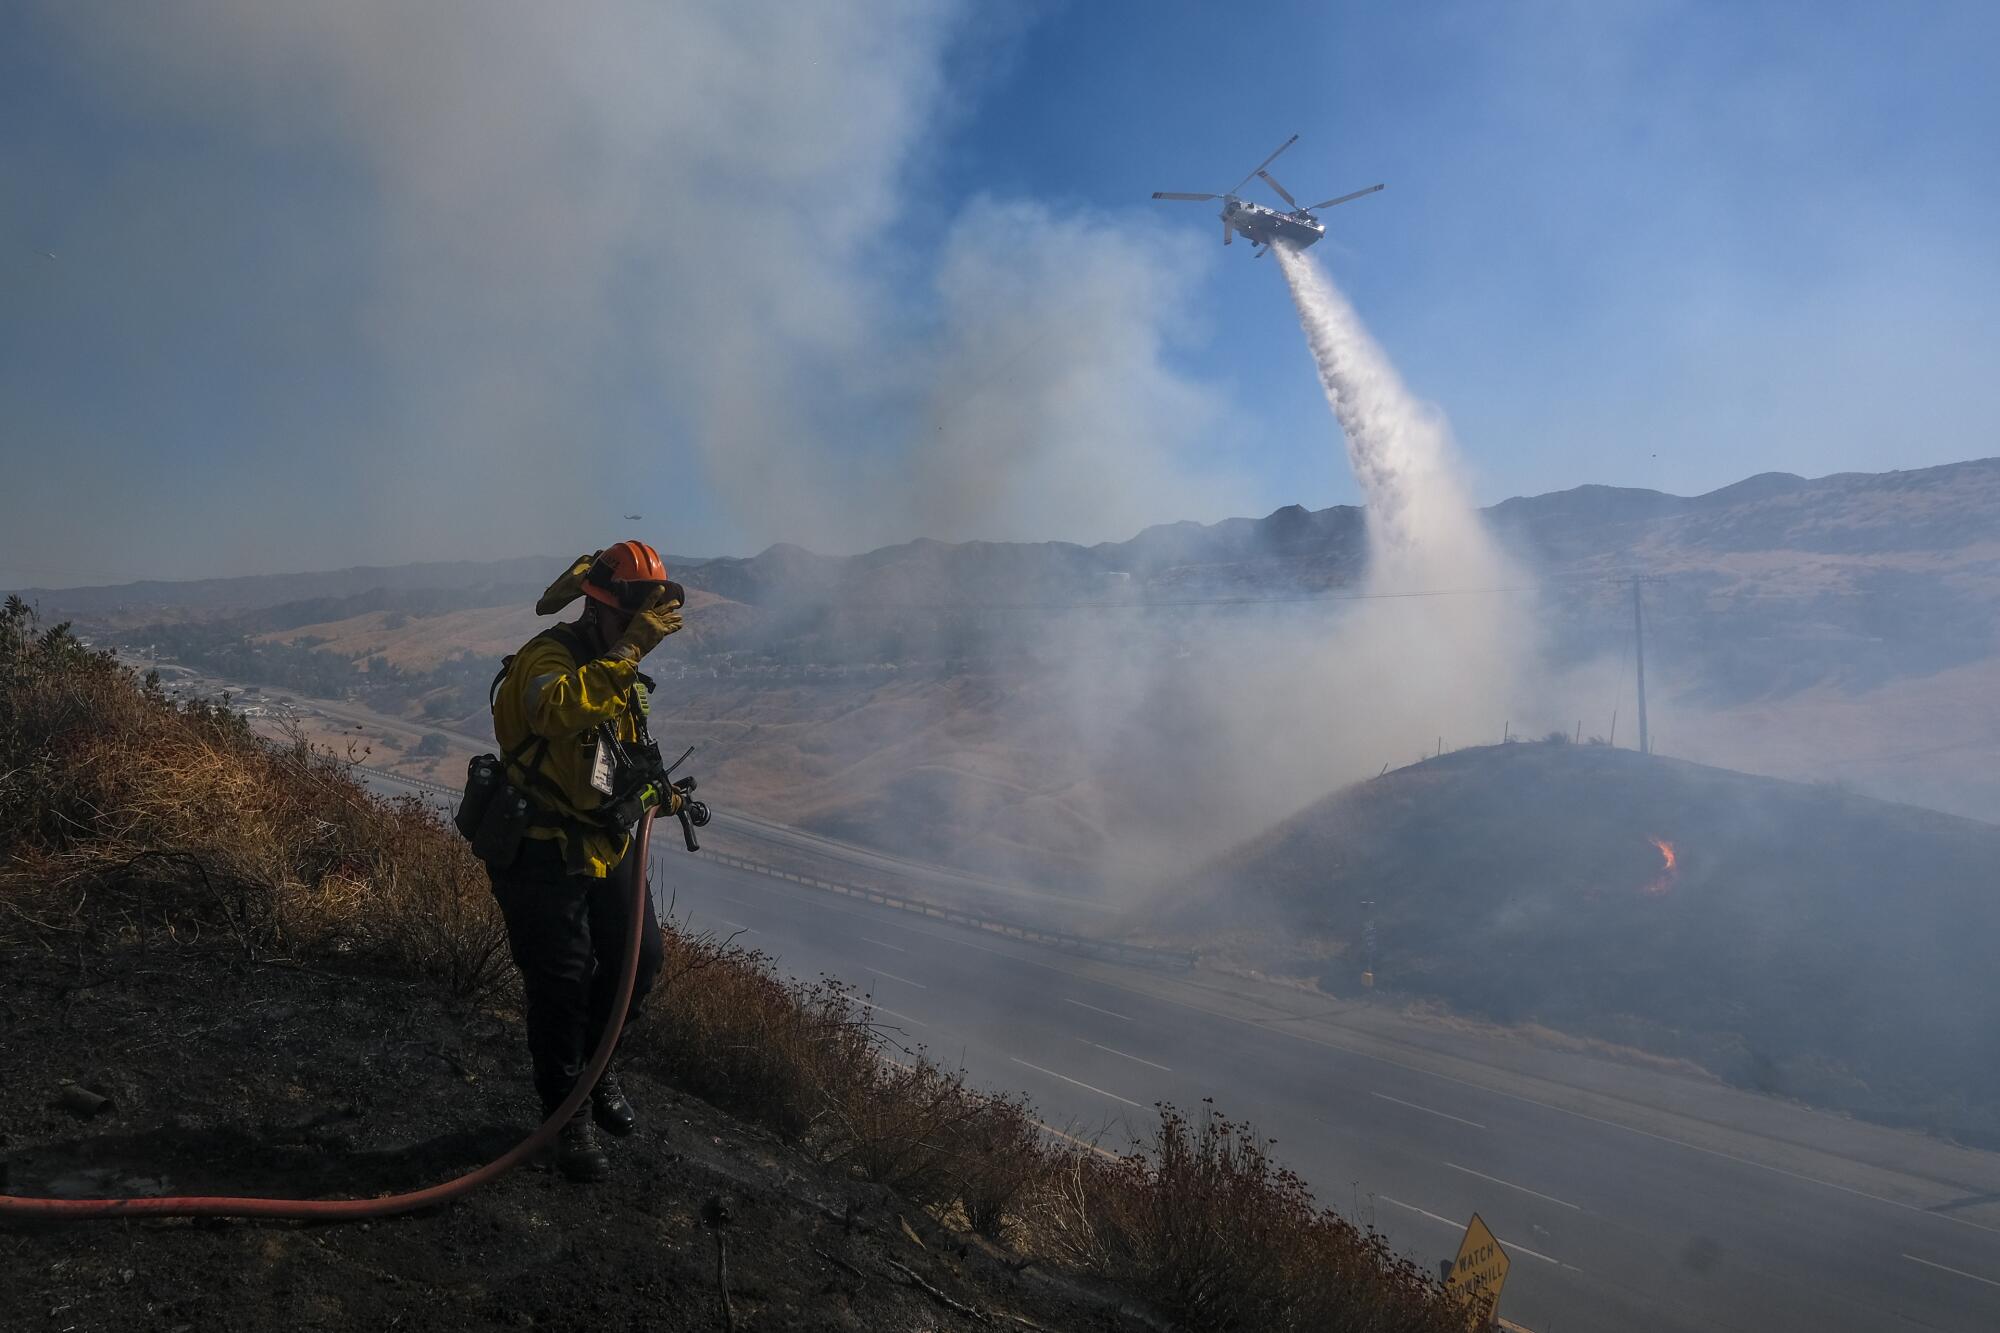 A firefighter works on hotspots as a helicopter prepares to drop water on the Route fire in the background.